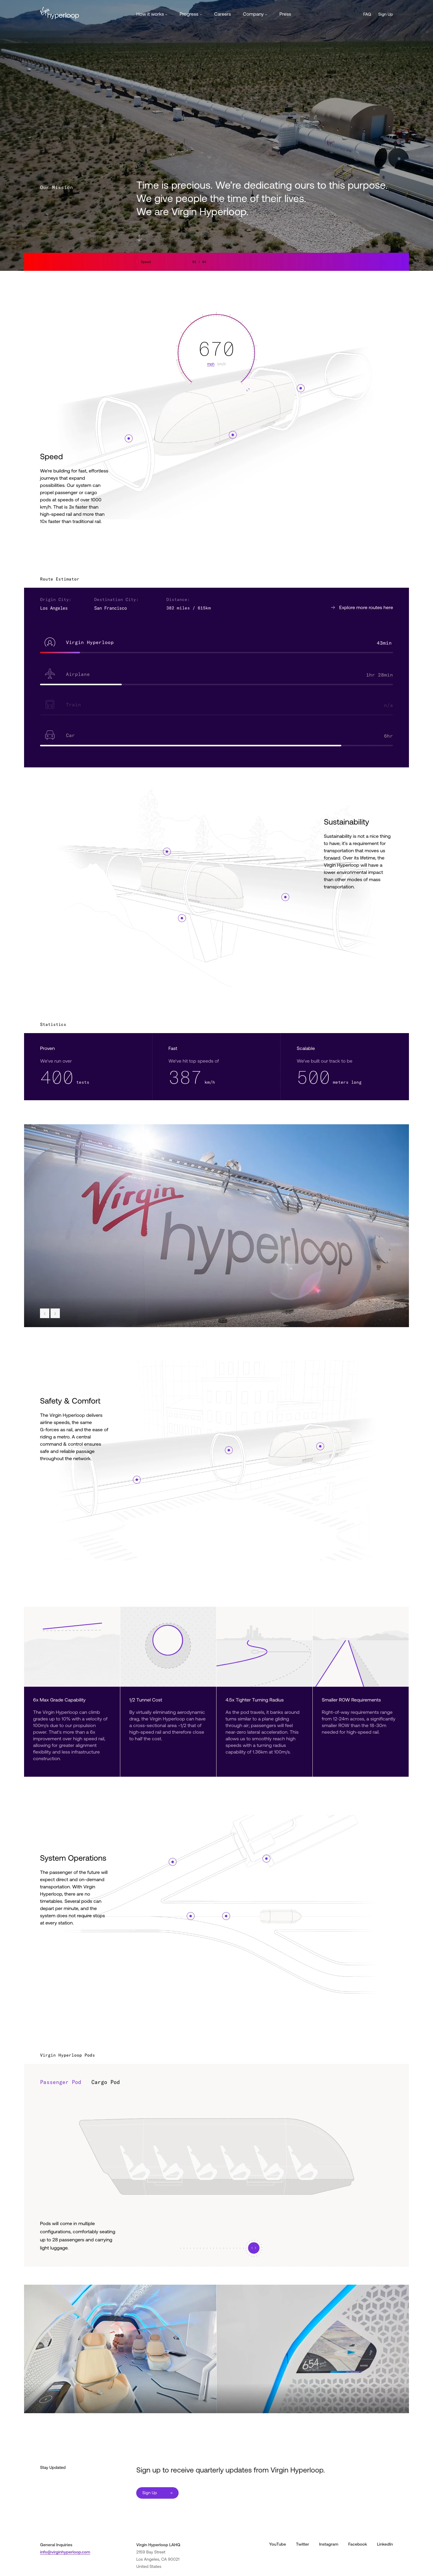 Virgin Hyperloop Landing Page Example: Virgin Hyperloop is the only company in the world that has successfully tested its technology at scale, launching the first new mode of mass transportation in over 100 years. 